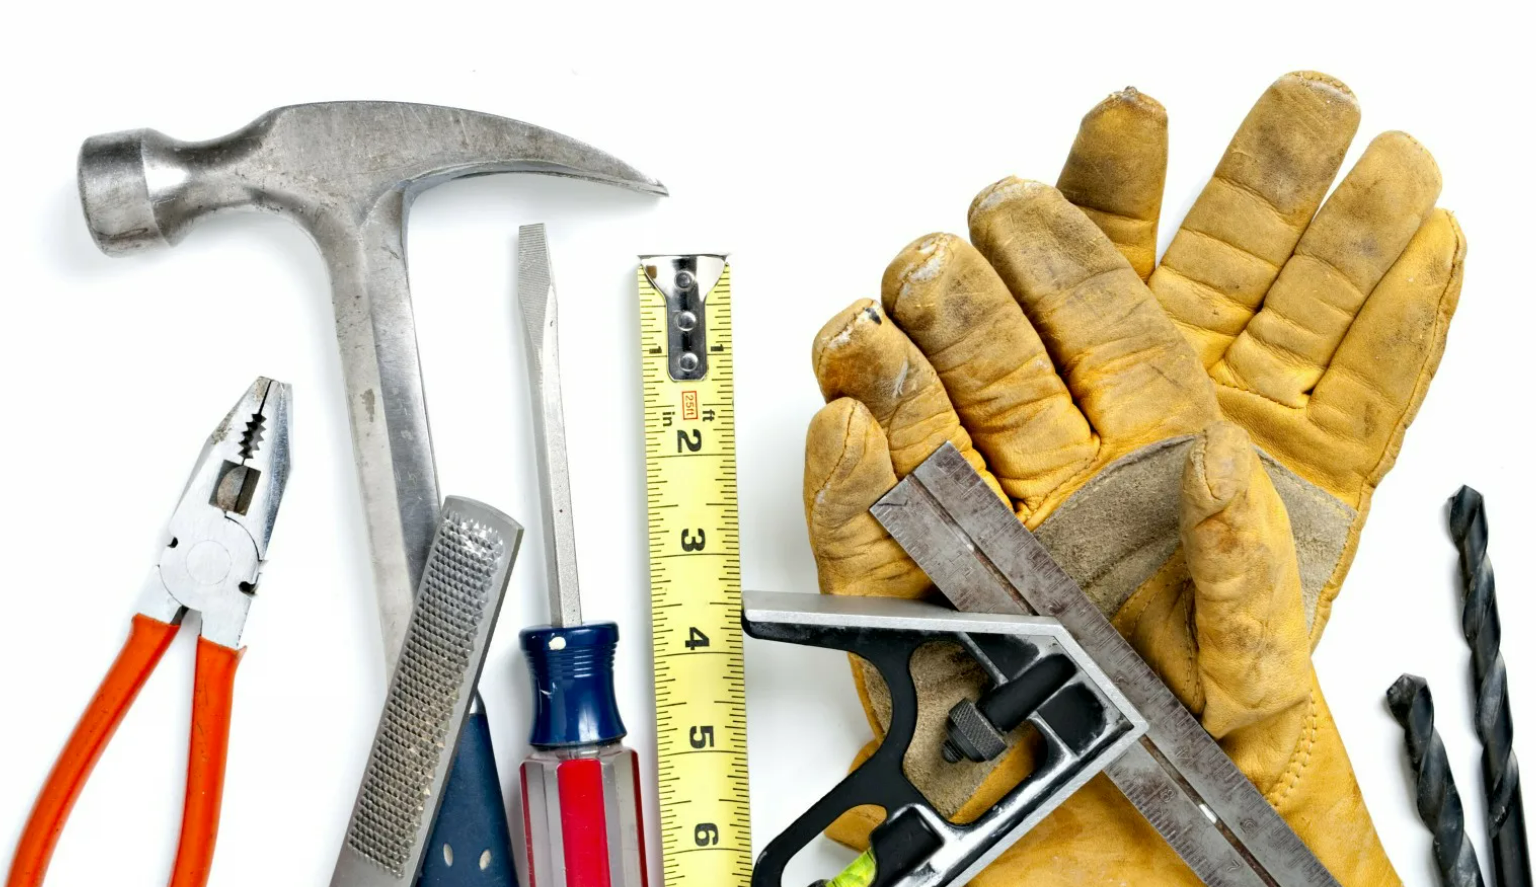 Handyman Services – What Does Handyman Do?